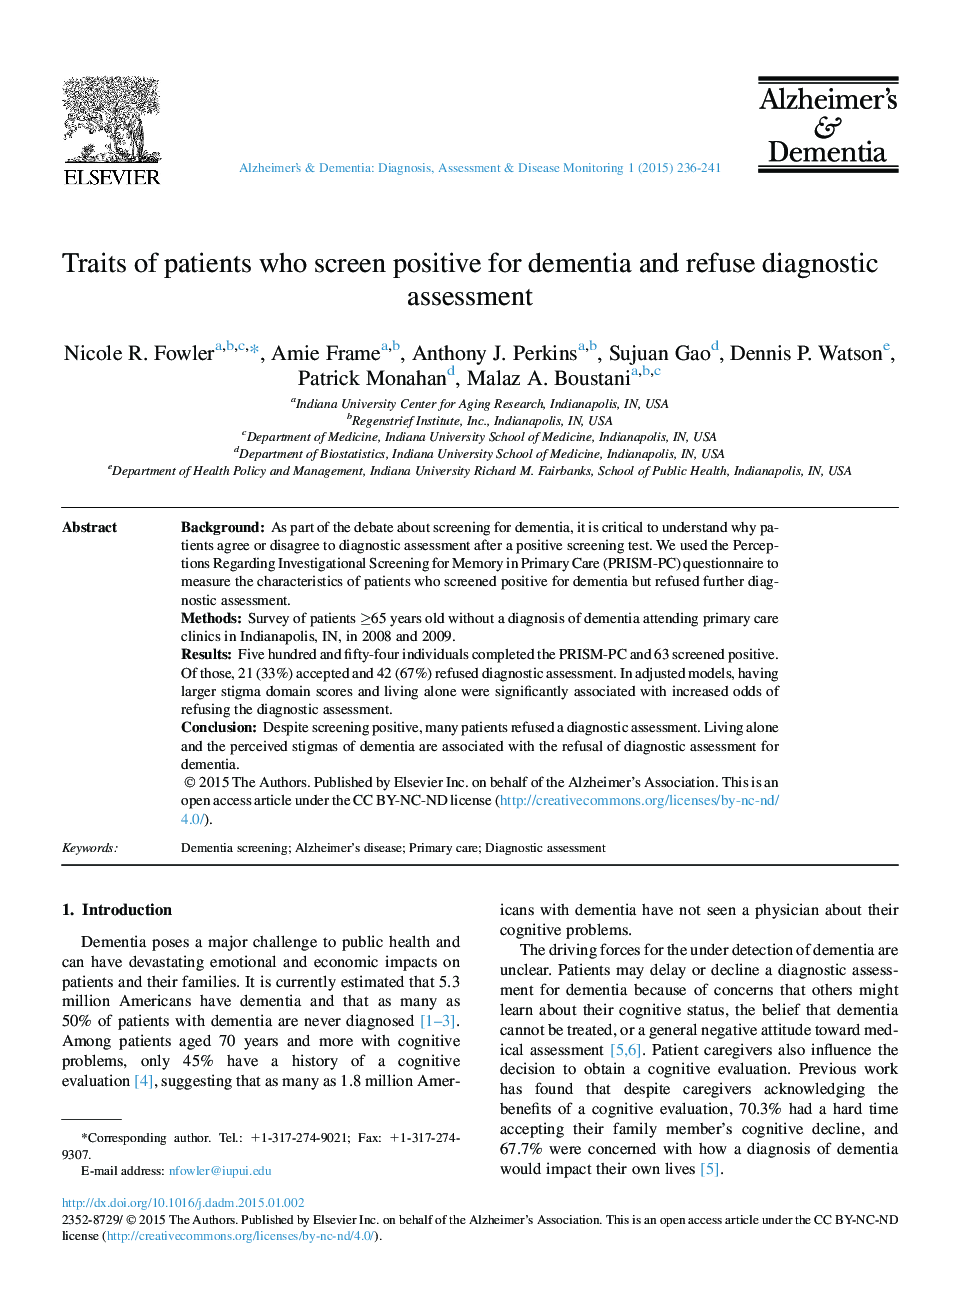 Traits of patients who screen positive for dementia and refuse diagnostic assessment